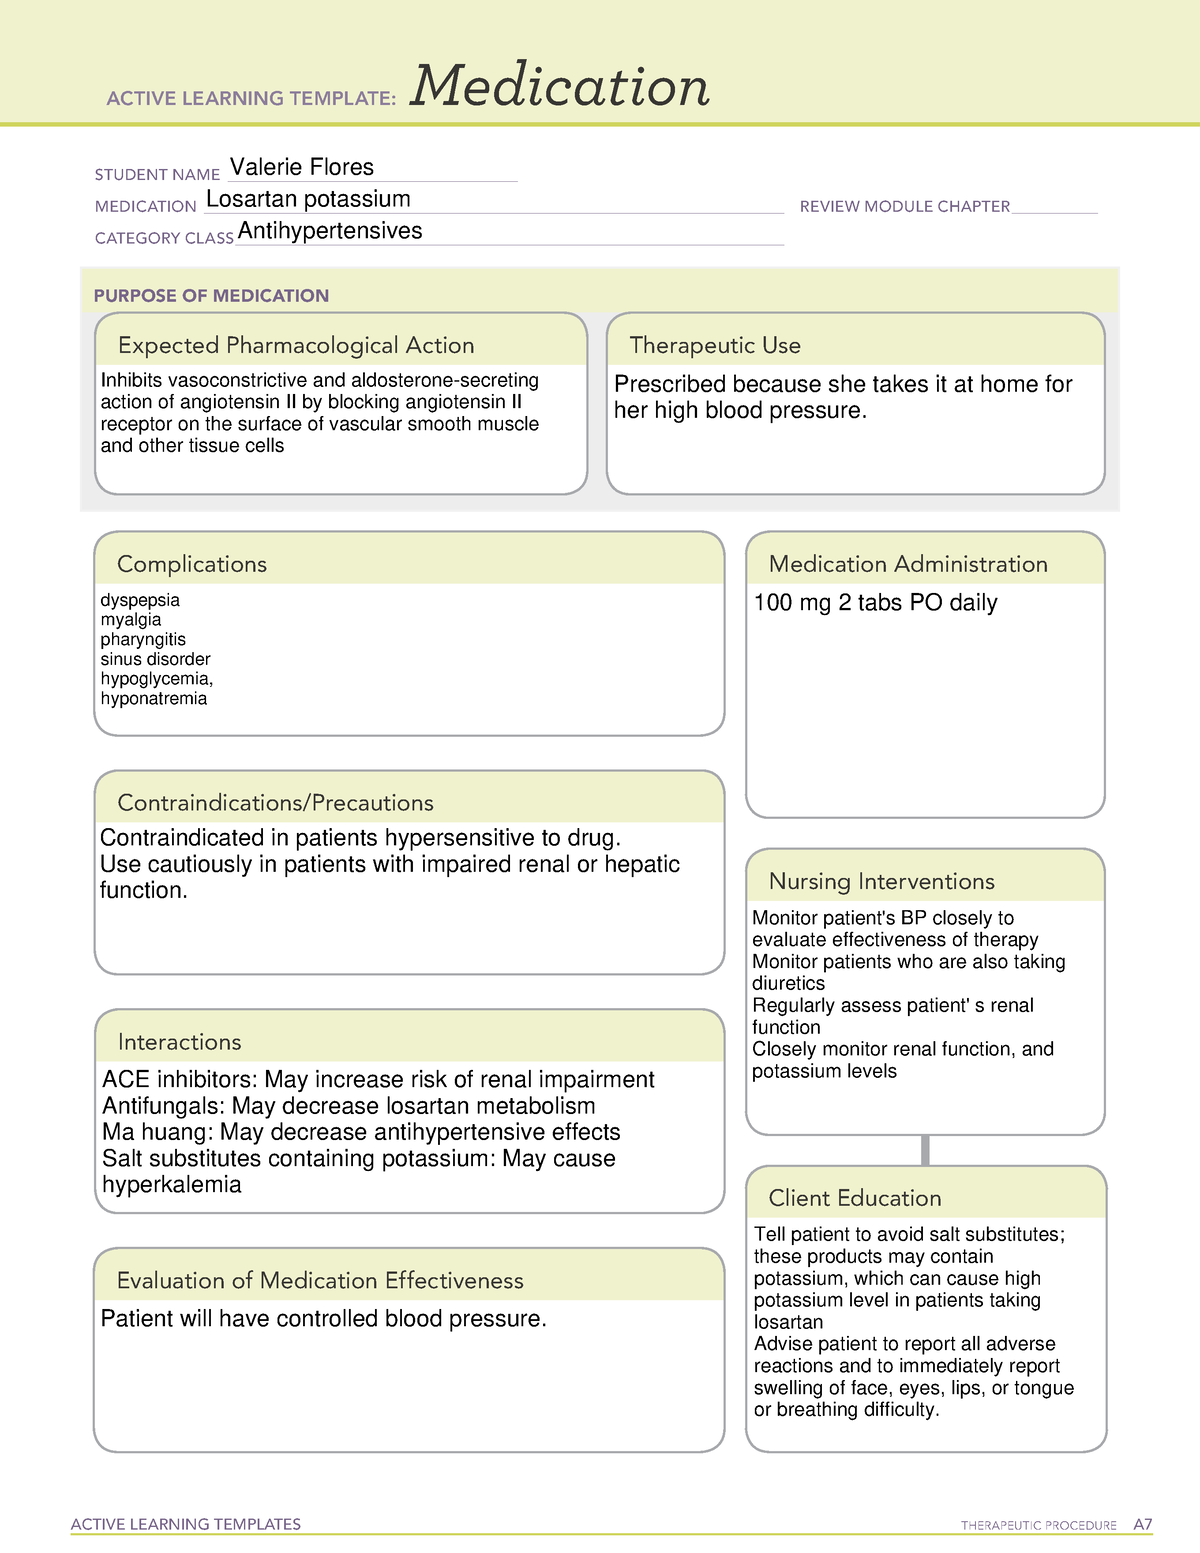 ati-med-form-losartan-active-learning-templates-therapeutic-procedure